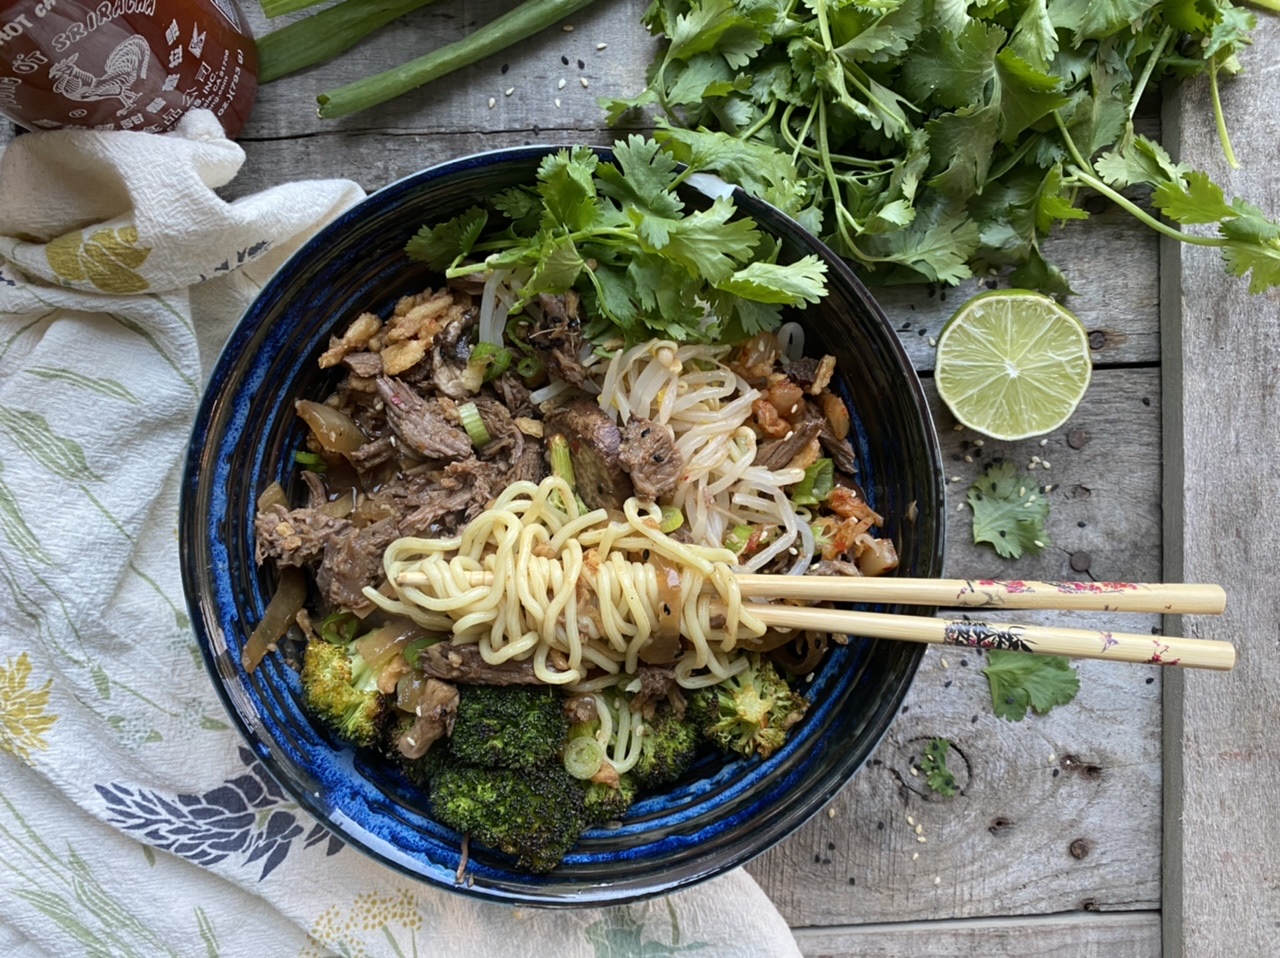 4C7685B9 2608 49CD 87E5 0FA89F32DABC - Slow Cooker Asian Ginger Noodles with Spicy Pulled Beef & Roasted Broccoli